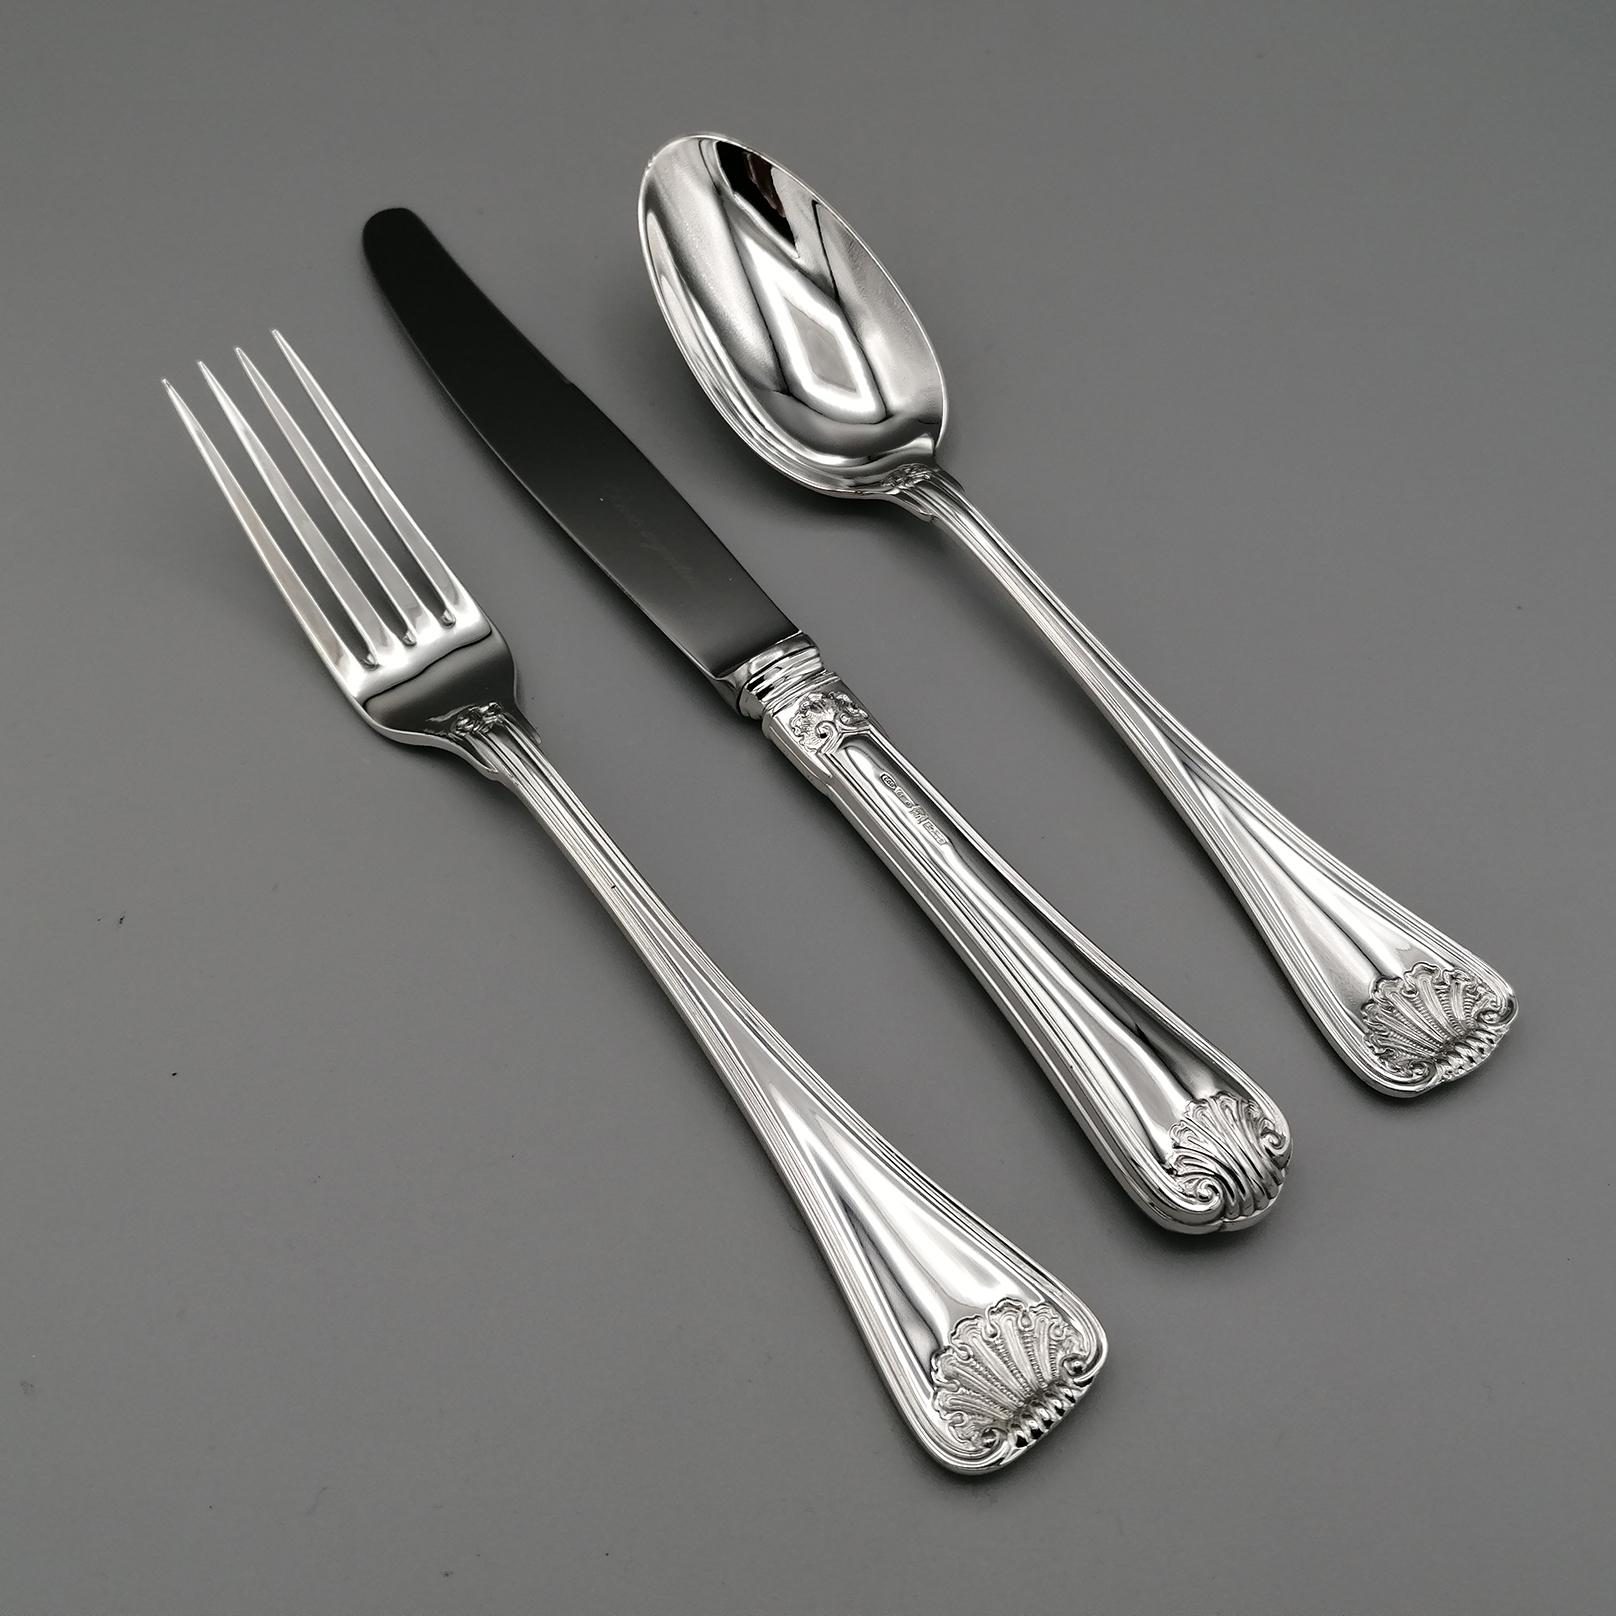 New complete cutlery set 101 pieces in solid silver 